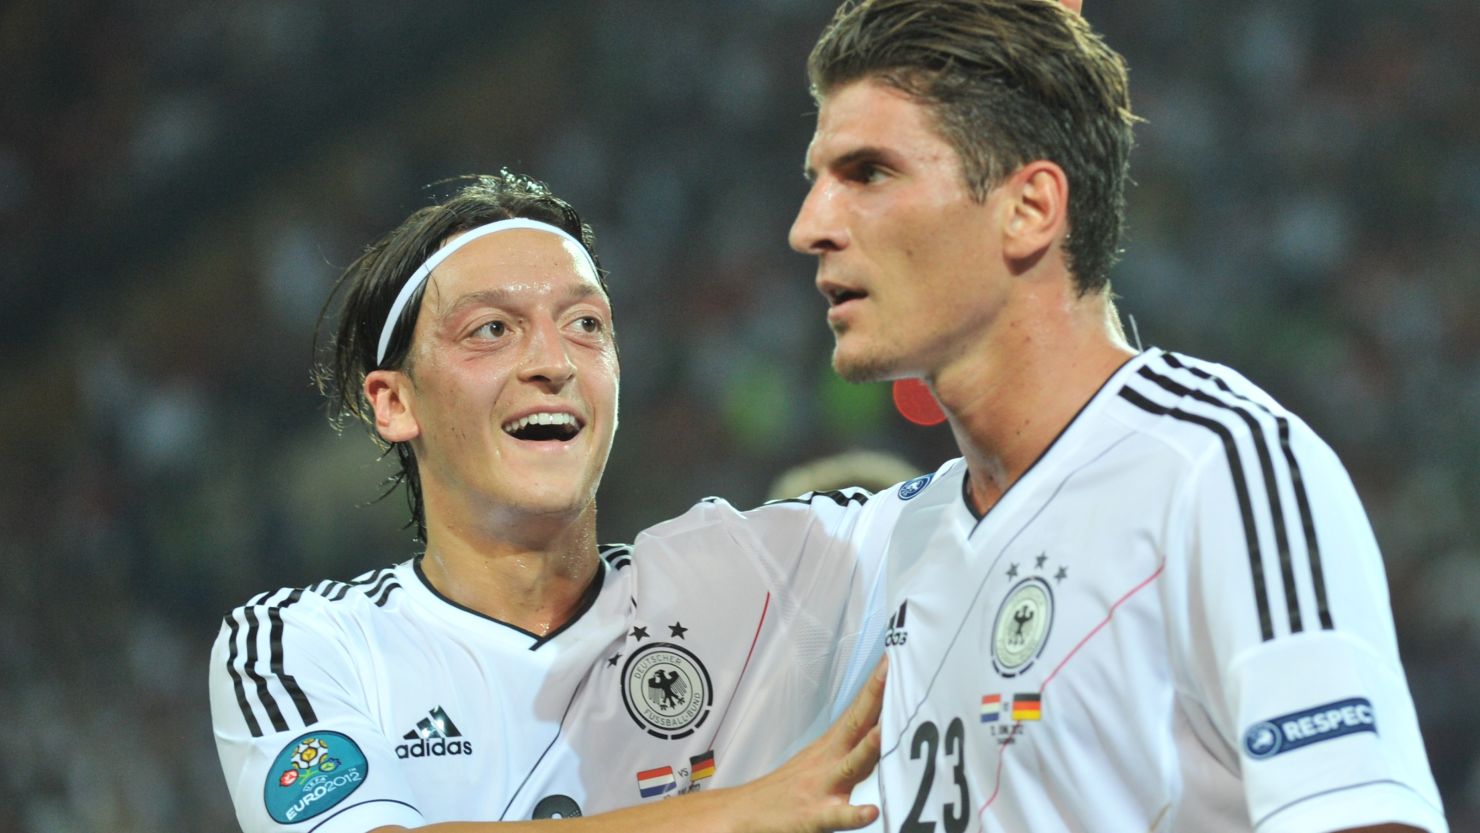 Germany striker Mario Gomez is congratulated by midfielder Mesut Oezil after scoring the first of his two goals